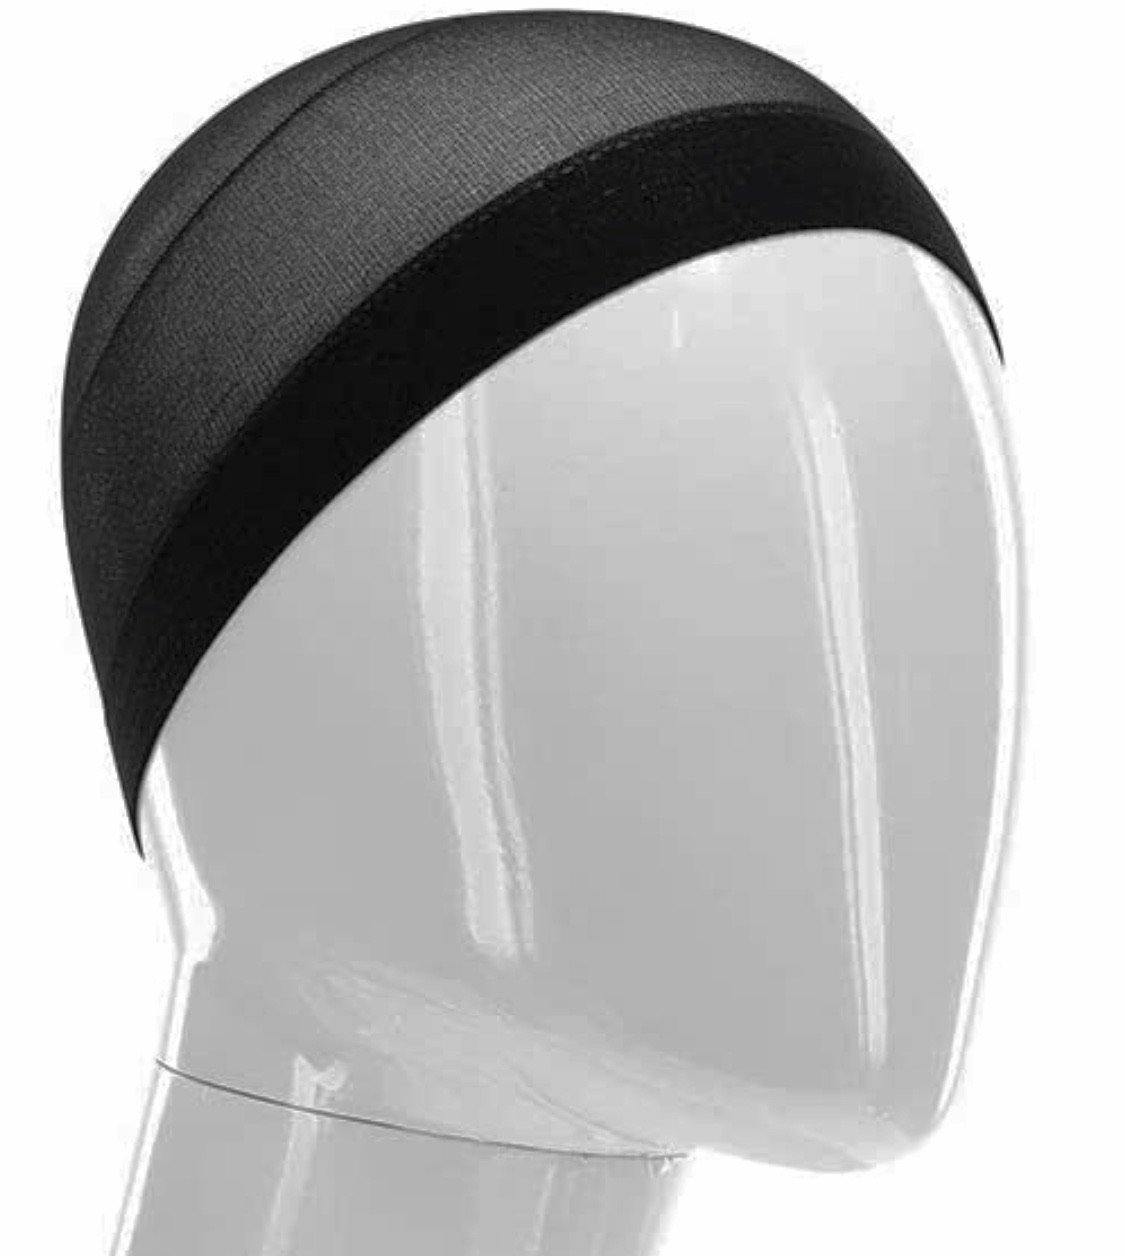 360 Wave Stocking Cap - Stretchable 2 PACK (BLACK) - SPI Styles